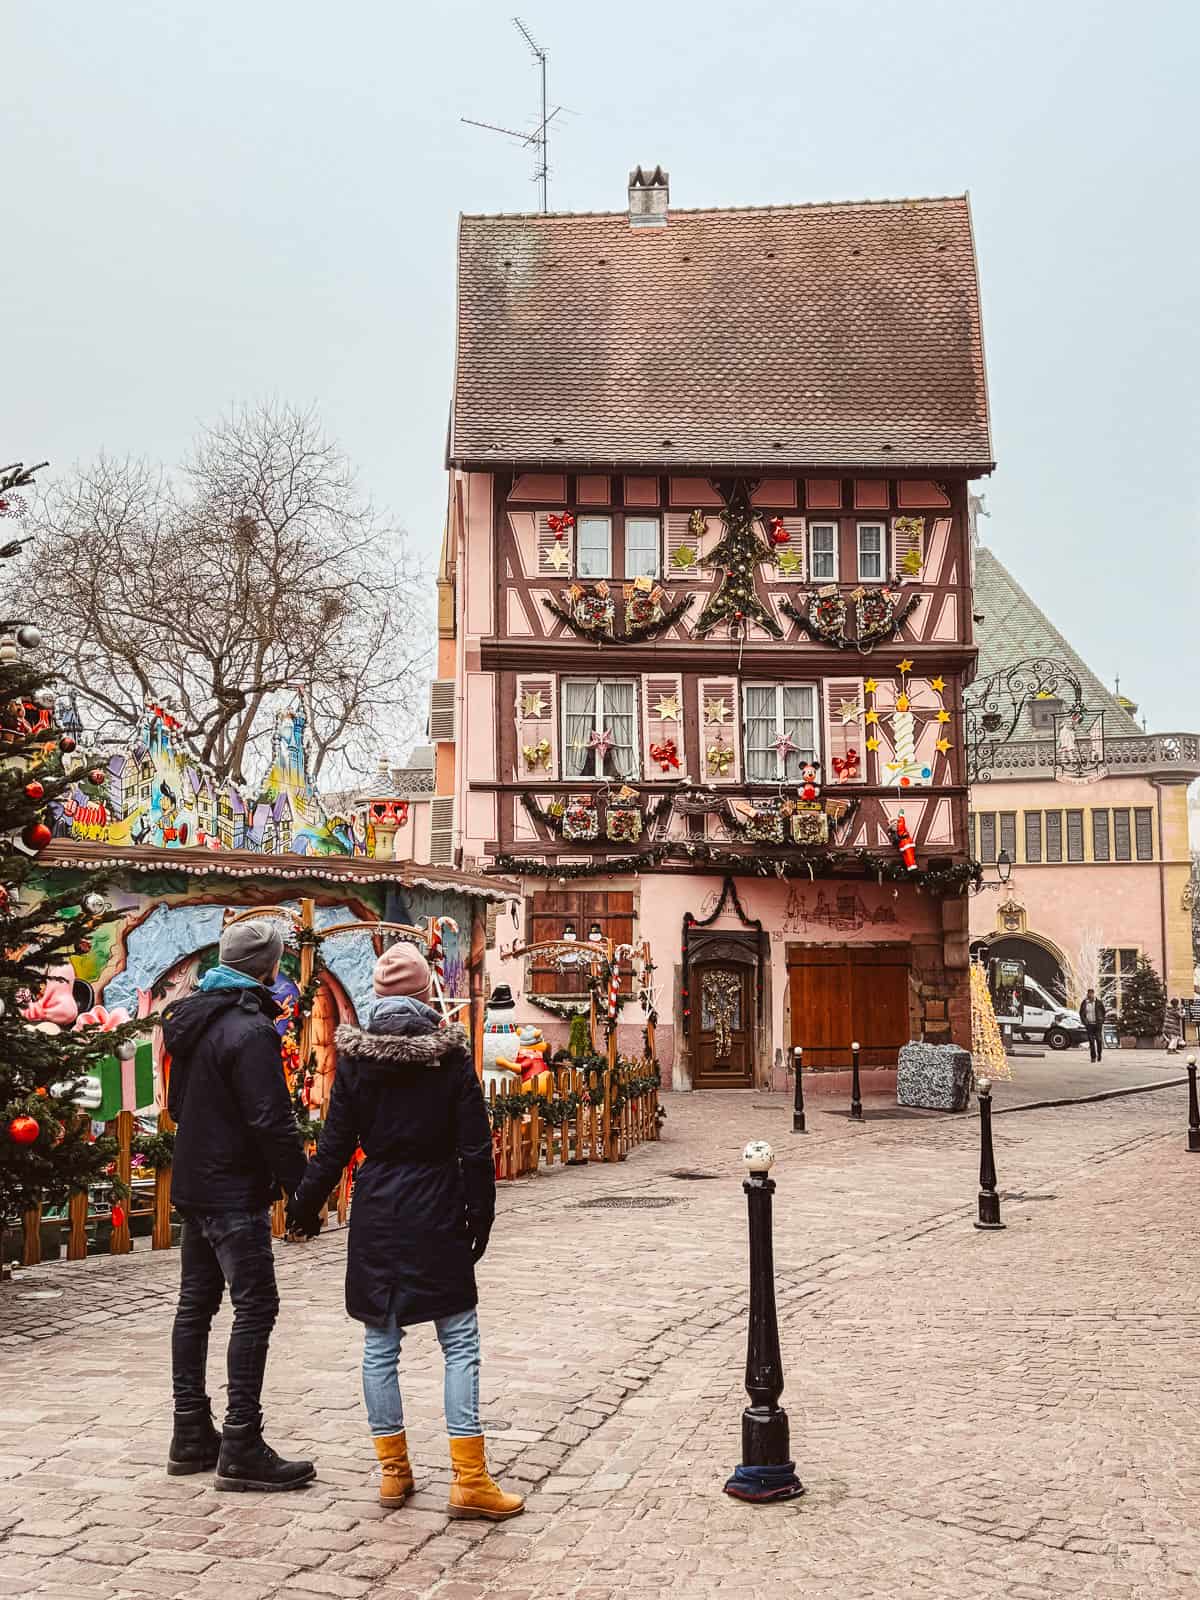 A couple stands admiring a whimsical pink half-timbered house adorned with Christmas decorations in Colmar, with a vibrant carousel and festive tree adding to the holiday spirit.